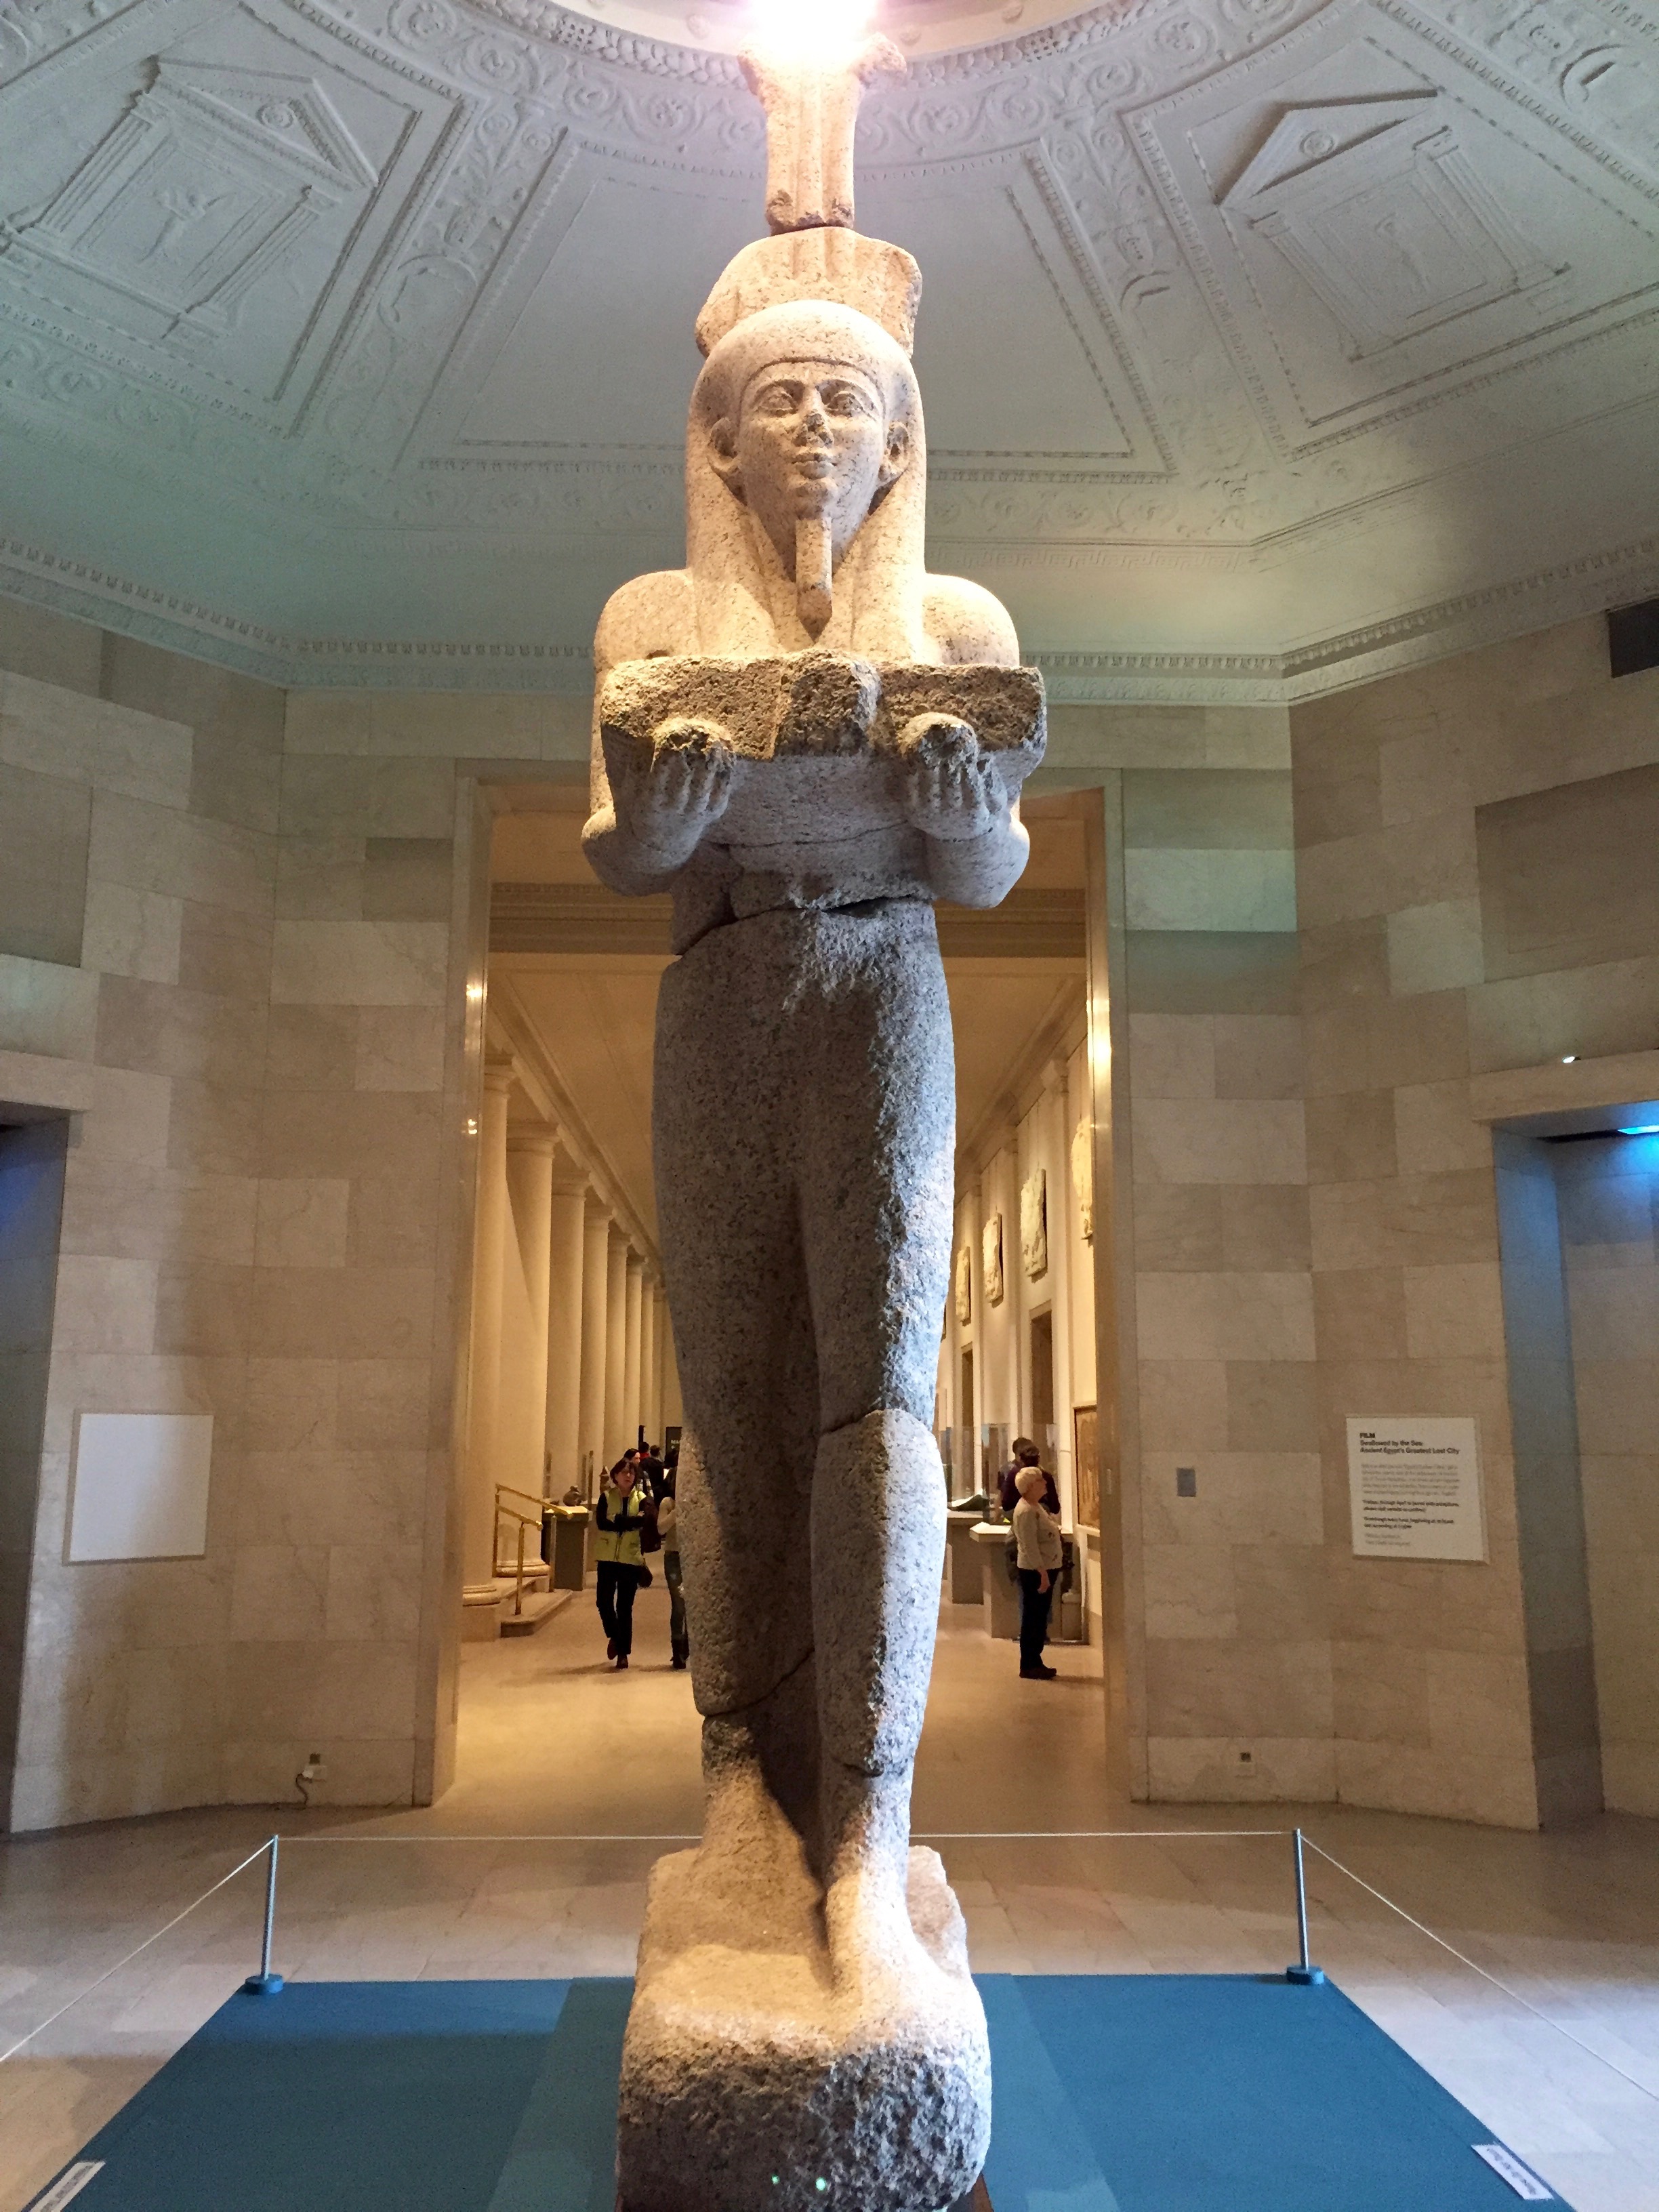 Minneapolis Institute of Art: Egypt's Sunken Cities, Colossal Statue of the God Hapy